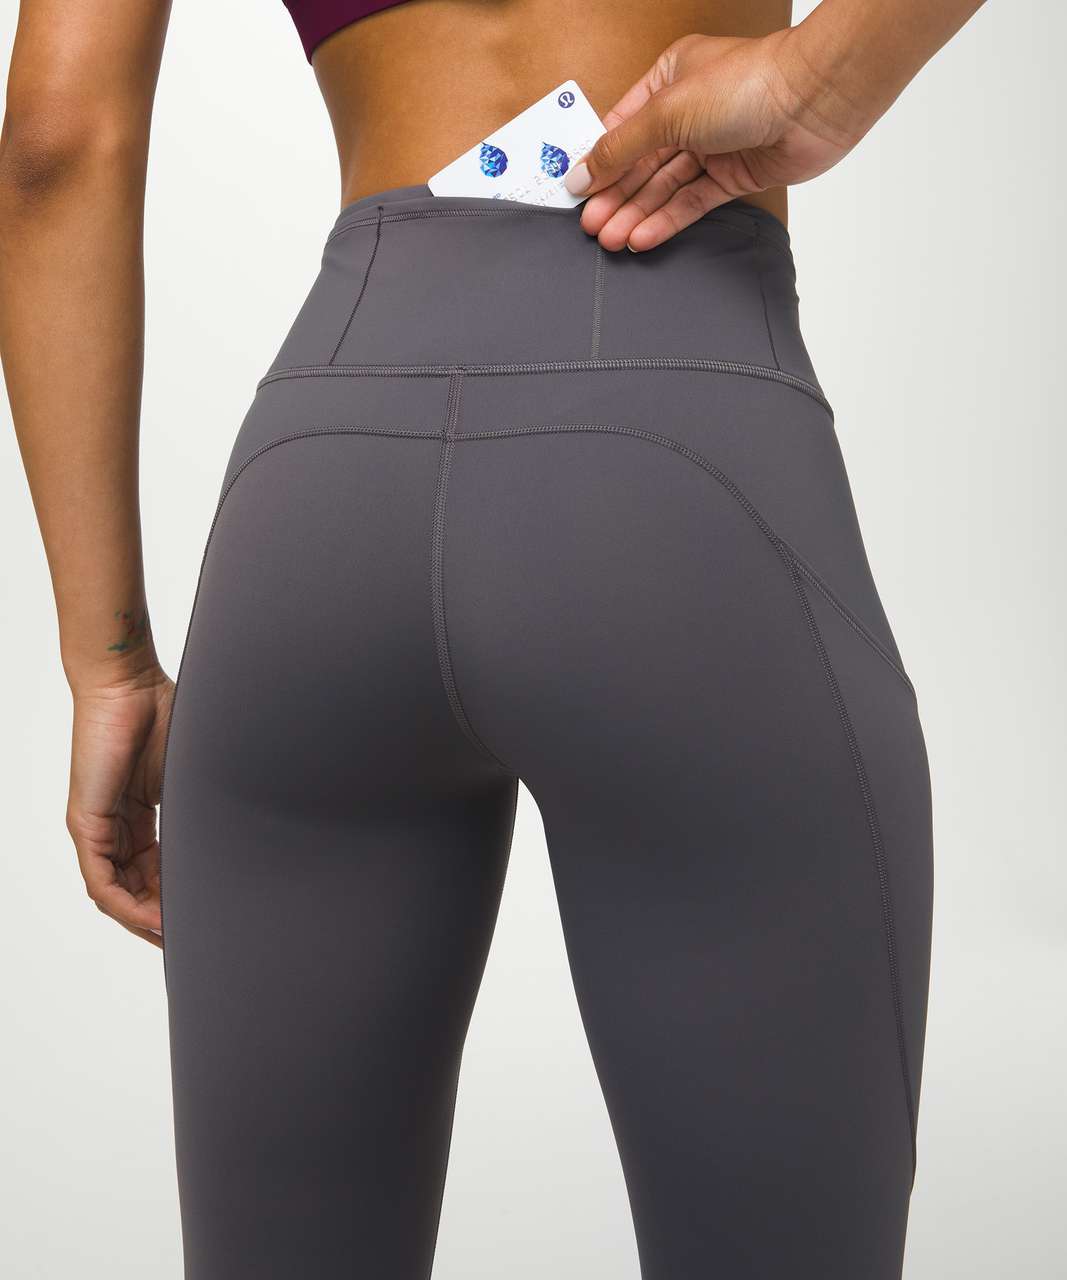 IRONMAN lululemon FAST AND FREE TIGHT 25 IN NON REFLECTIVE NULUX